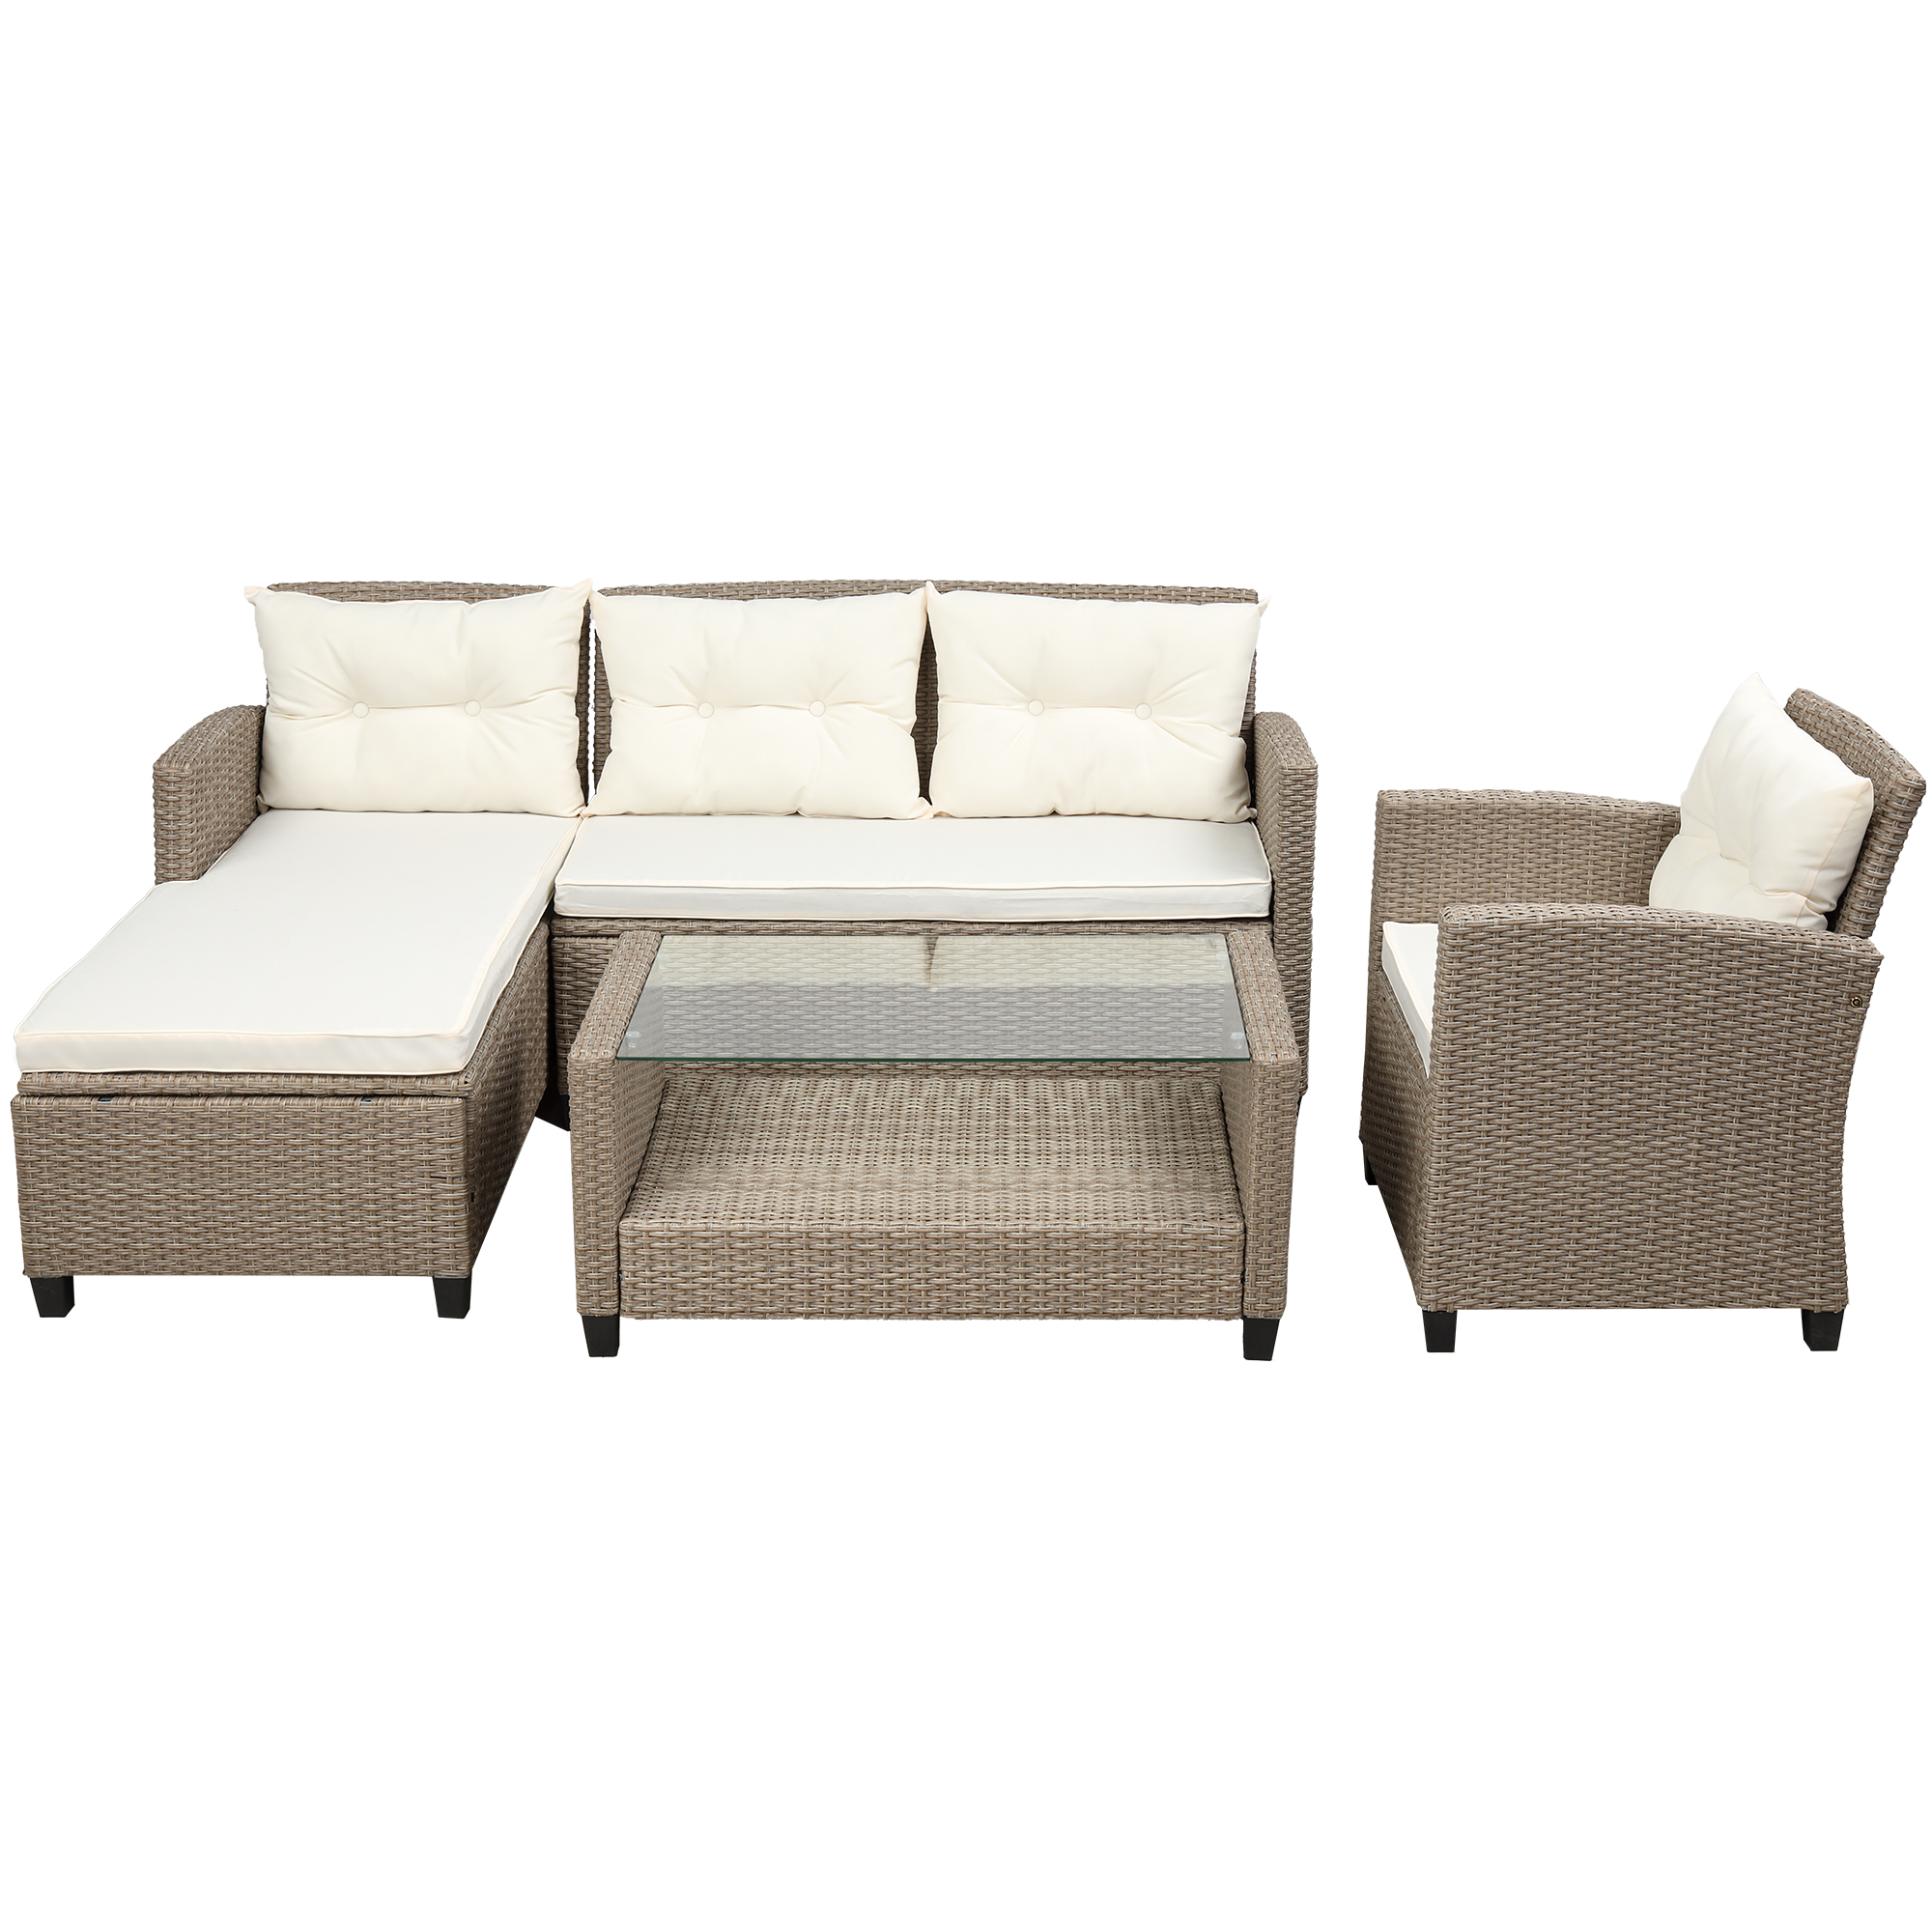 Patio Rattan Sofa Sets, YOFE 4 Piece Outdoor Patio Furniture Set, Wicker Deck Patio Furniture Dining Sets, Patio Sectional Sofa Sets with Beige Cushions, Outdoor Patio Set for Garden, Poolside, R1763 - image 5 of 7